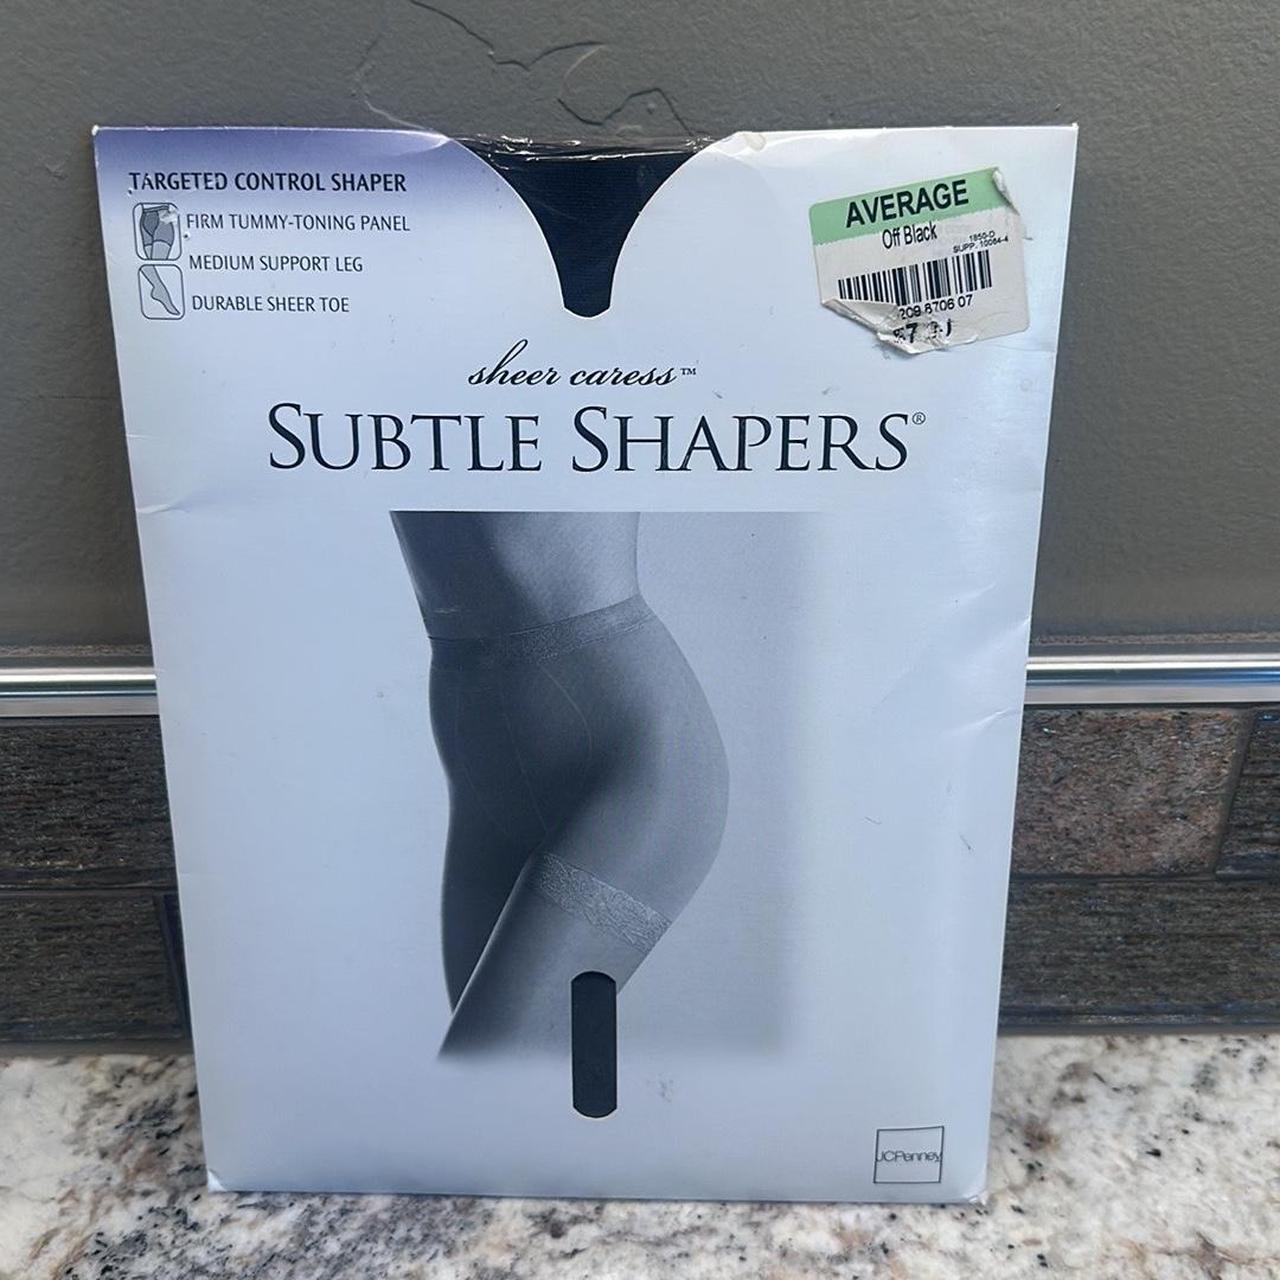 JCPenney Sheer Caress Subtle Shapers Targeted